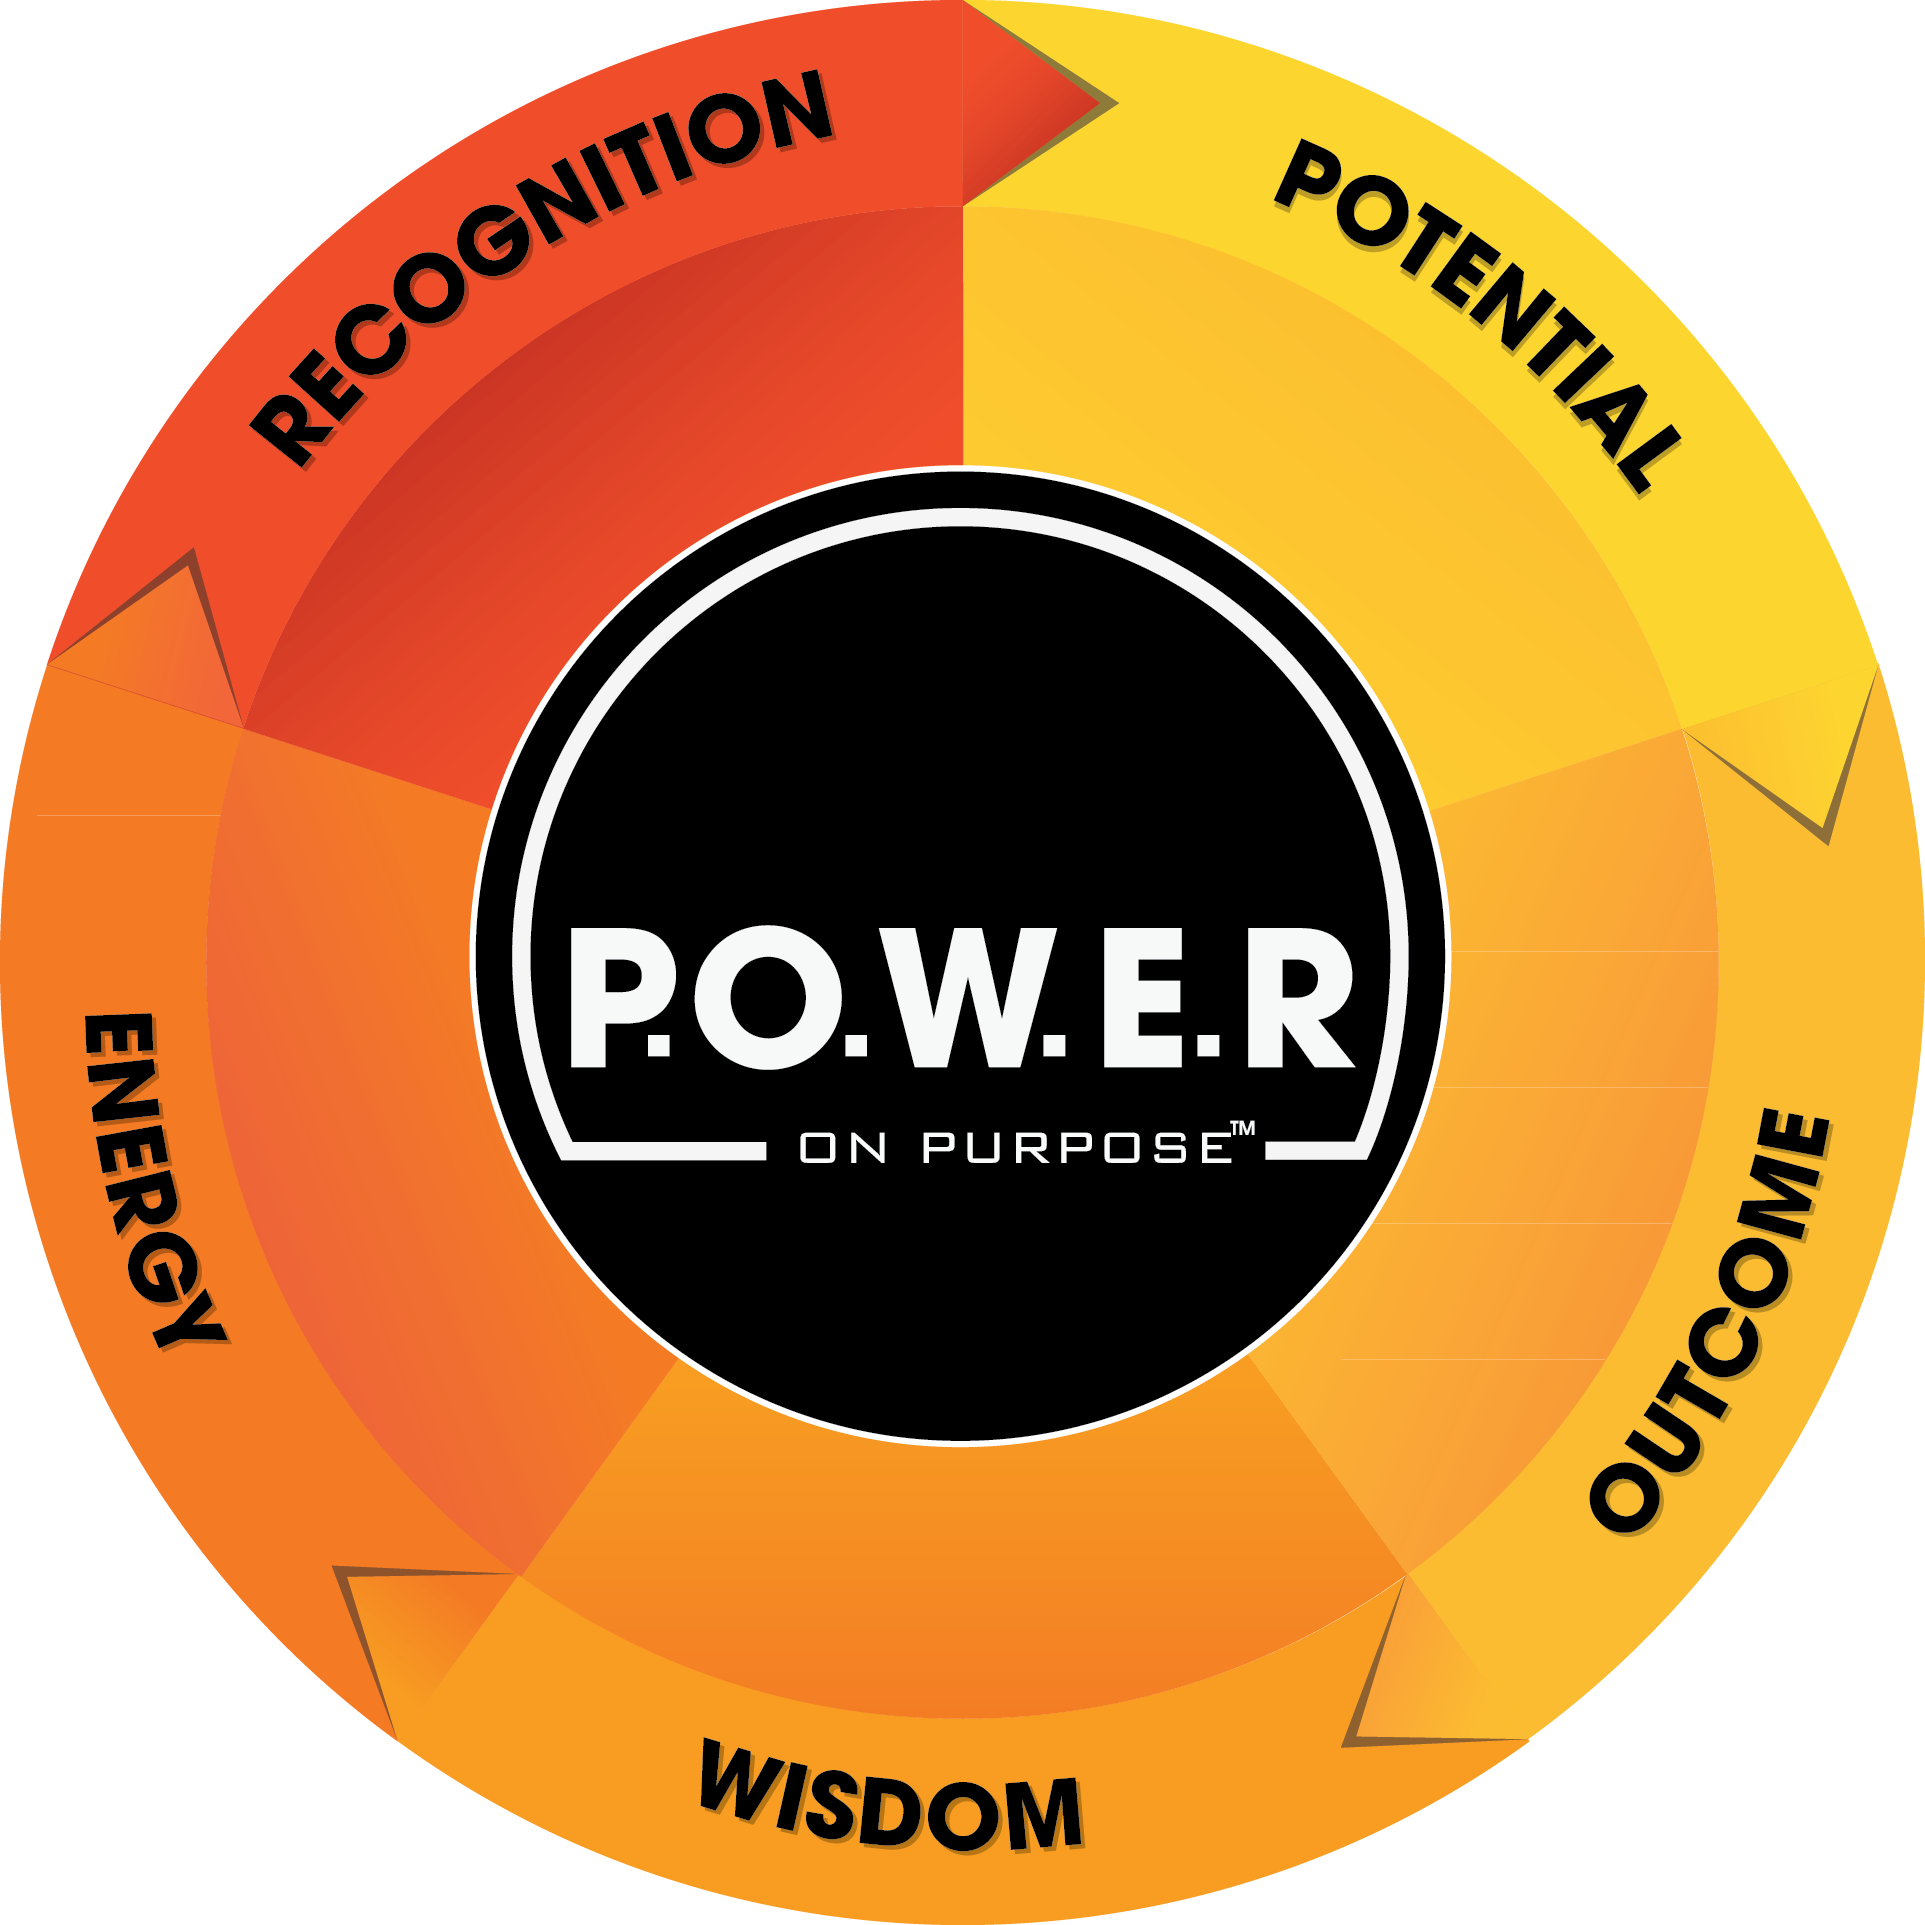 The 5 steps to power a life of purpose